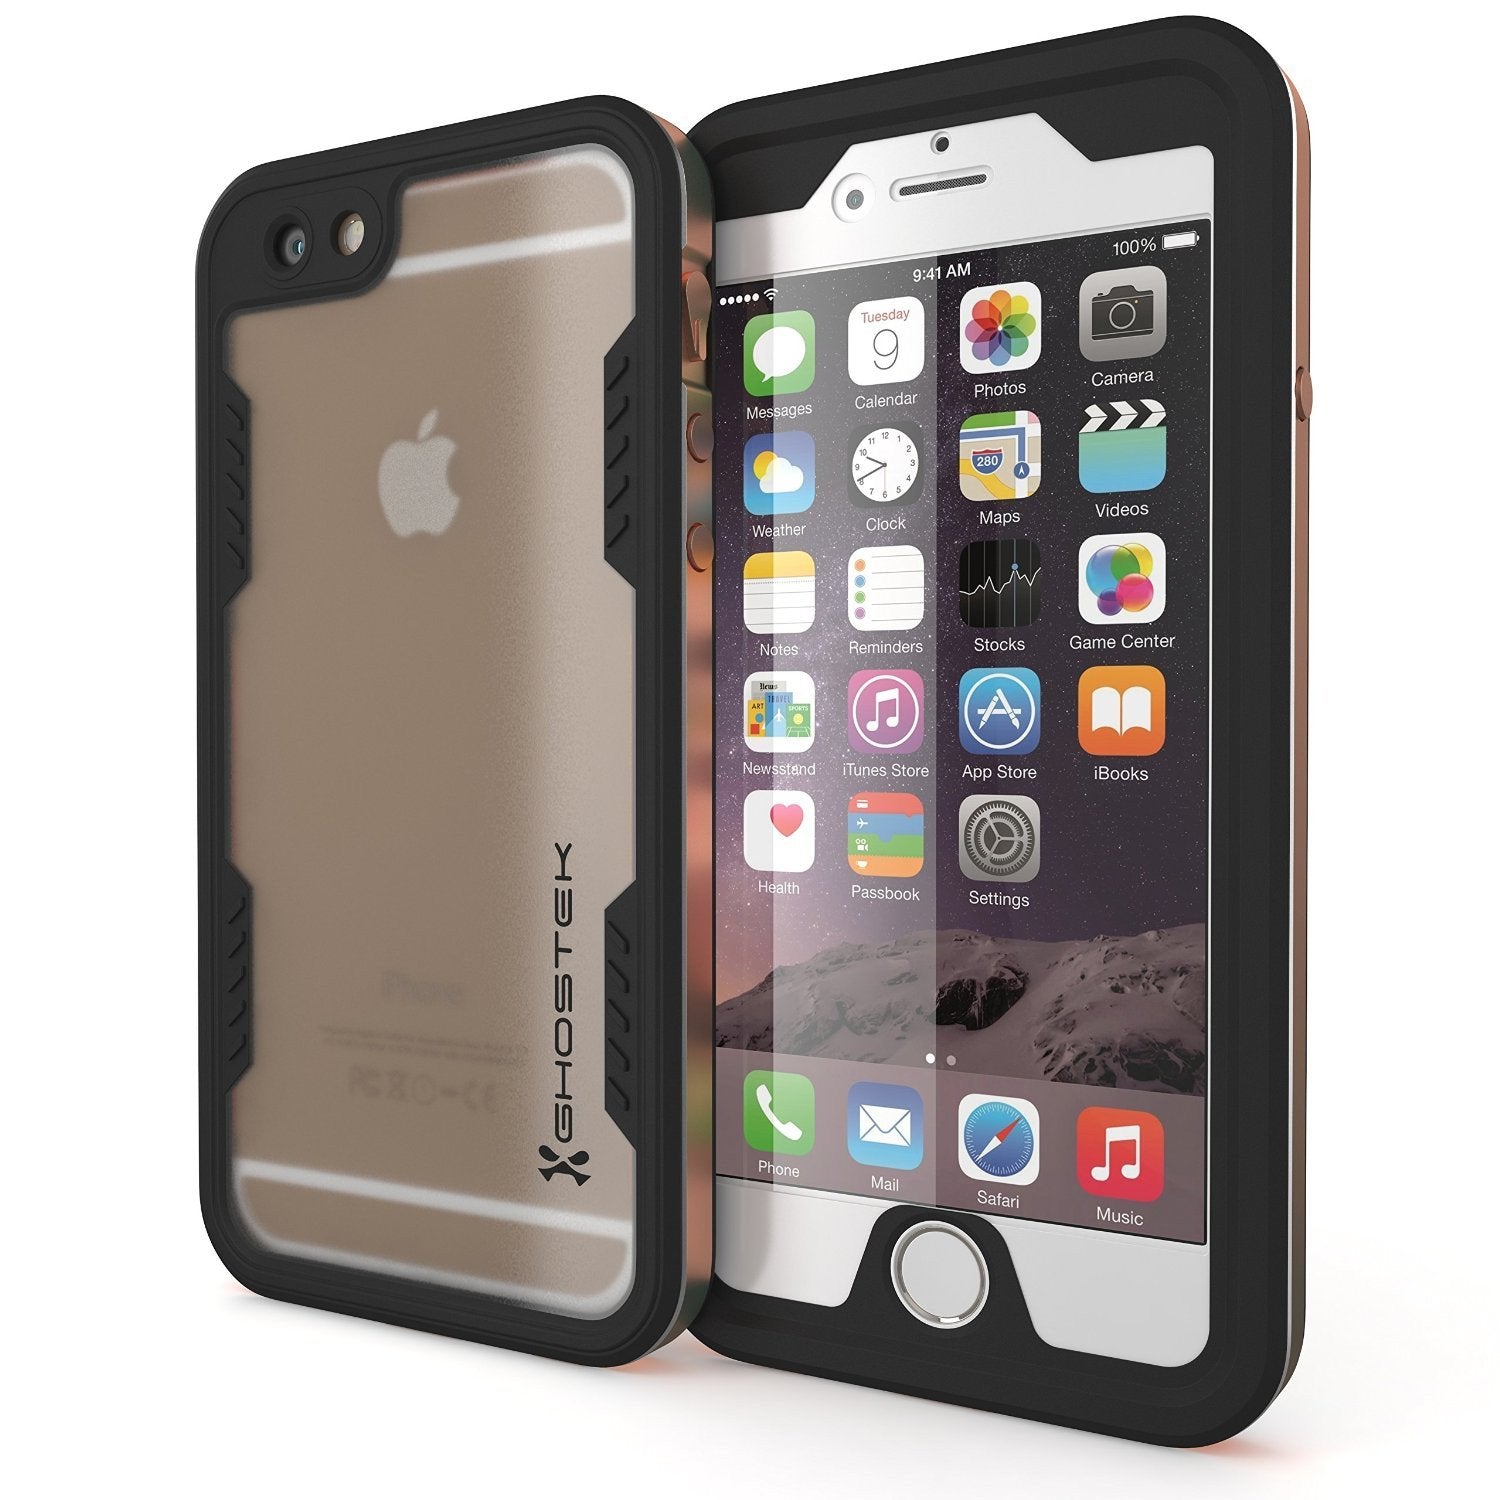 iPhone 6S+/6+ Plus Waterproof Case Ghostek Atomic 2.0 Gold w/ Attached Screen Protector | Slim